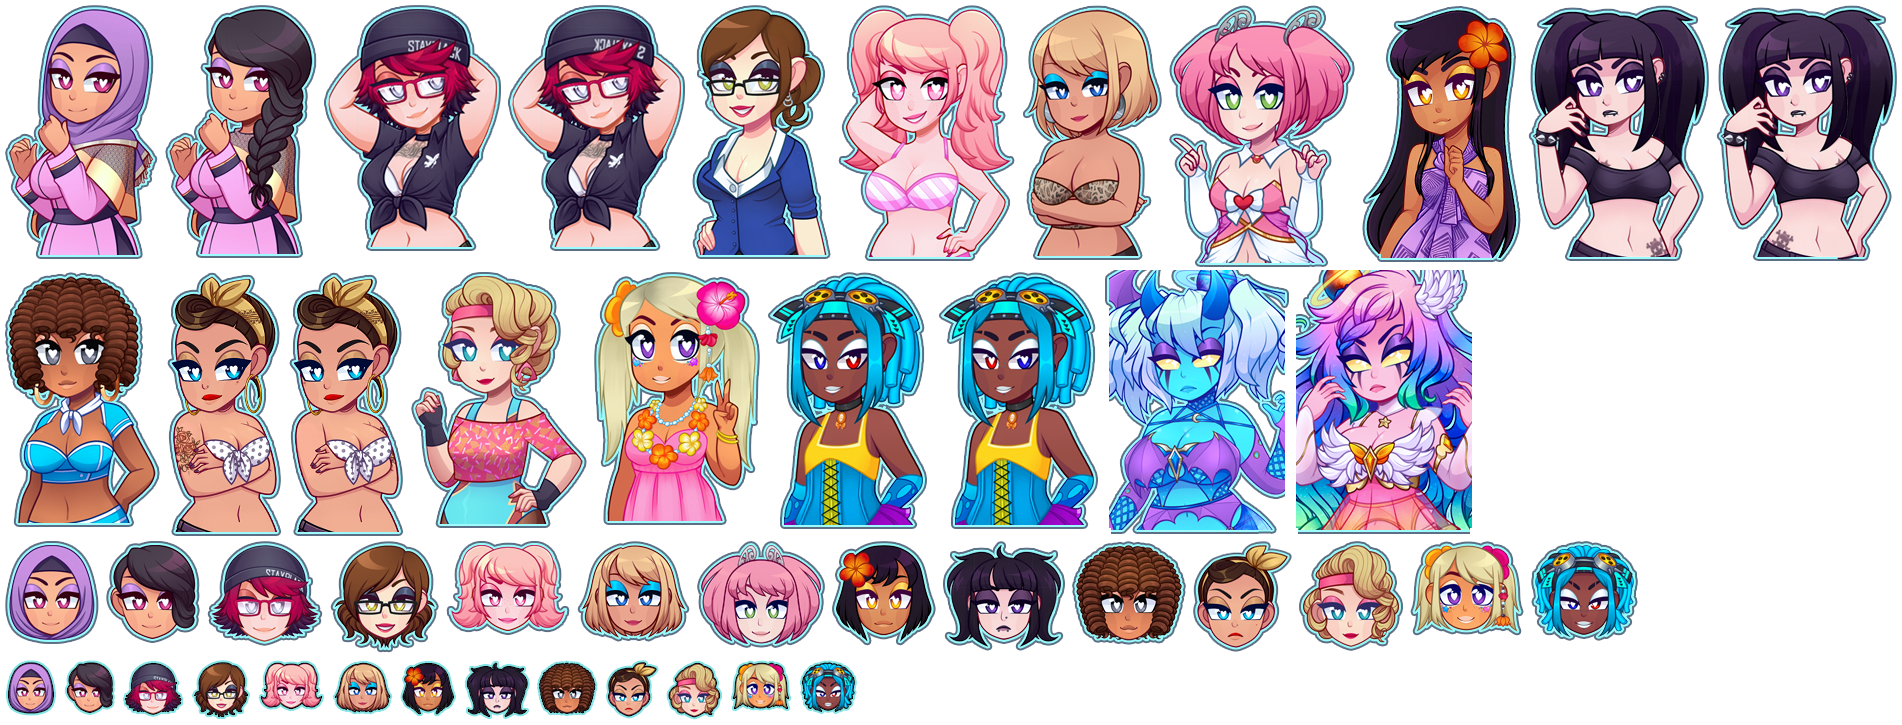 Huniepop 2: Double Date - Girl Heads and Portraits